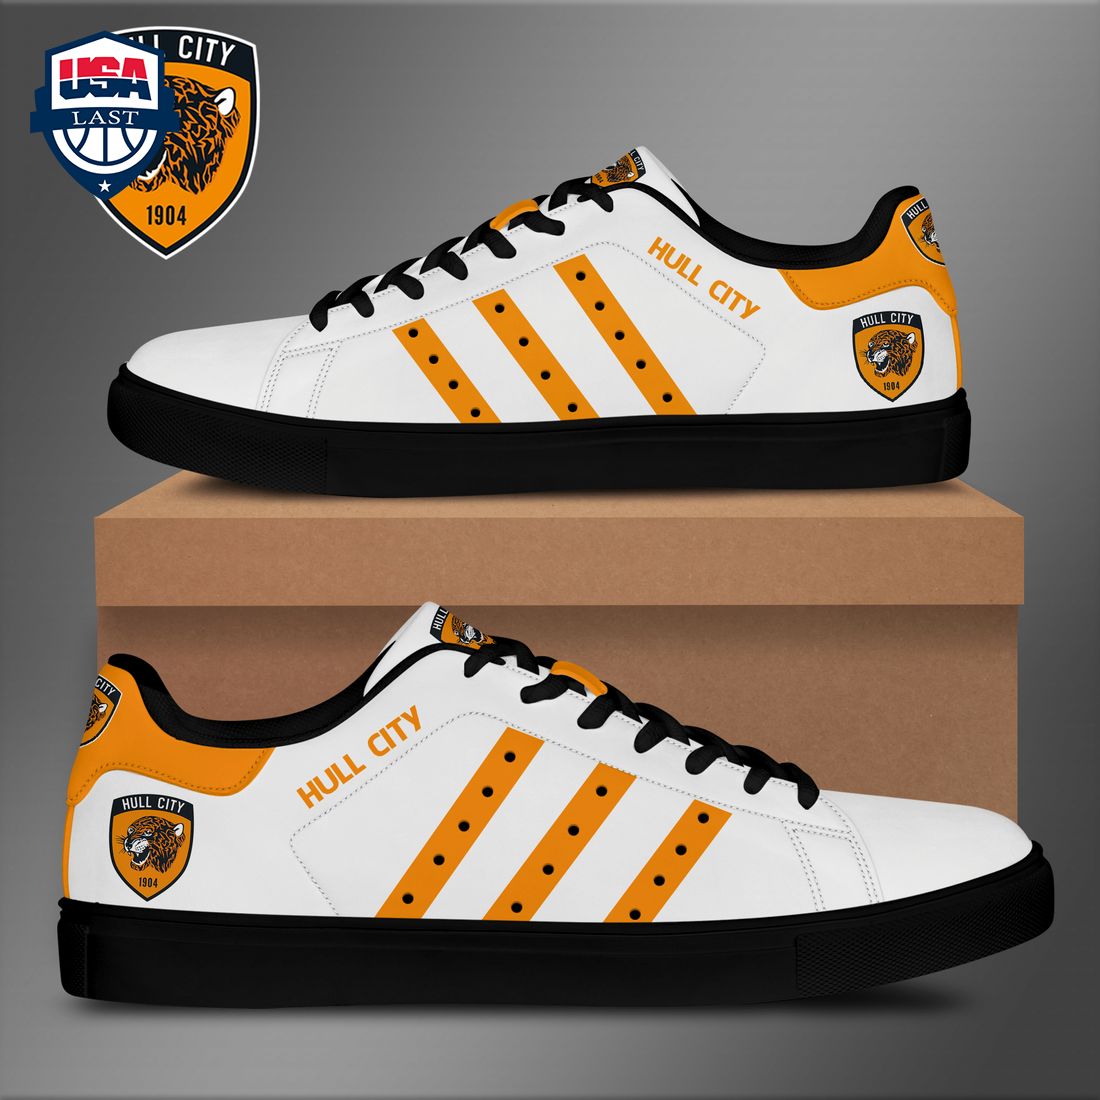 hull-city-fc-orange-stripes-style-5-stan-smith-low-top-shoes-1-euK3m.jpg